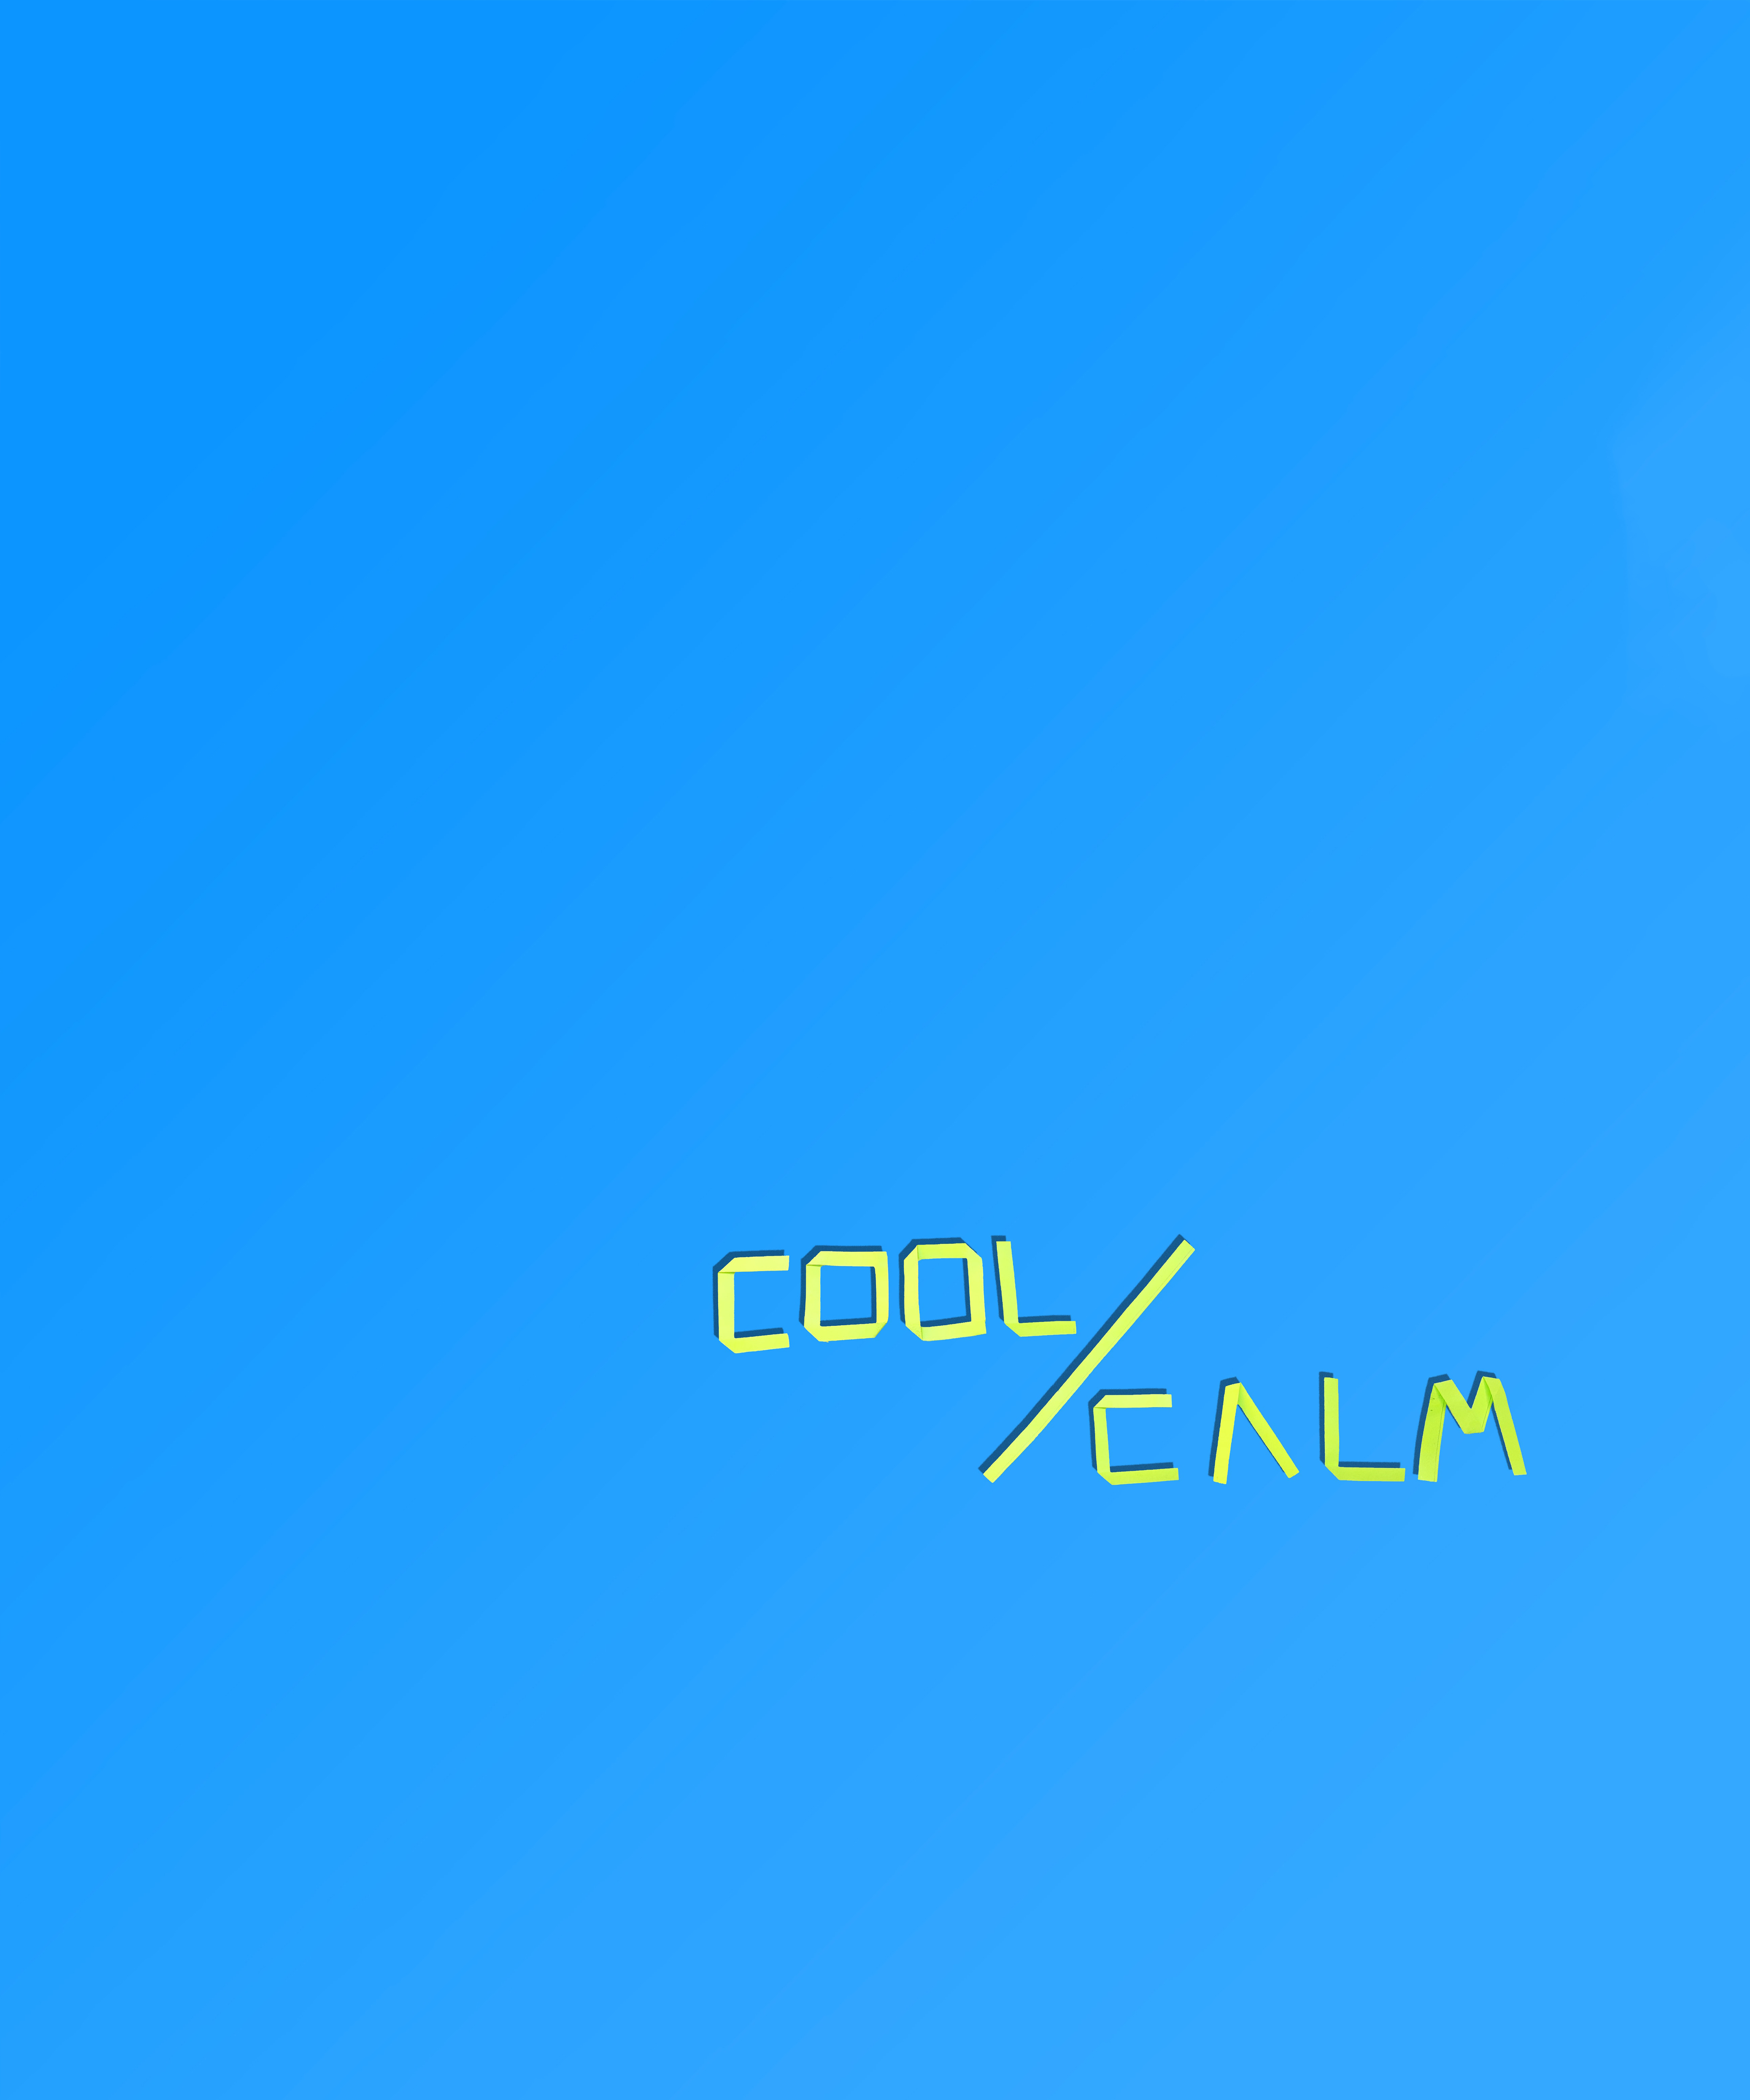 text, blue, words, cool, inscription, calmness, tranquillity, steeply